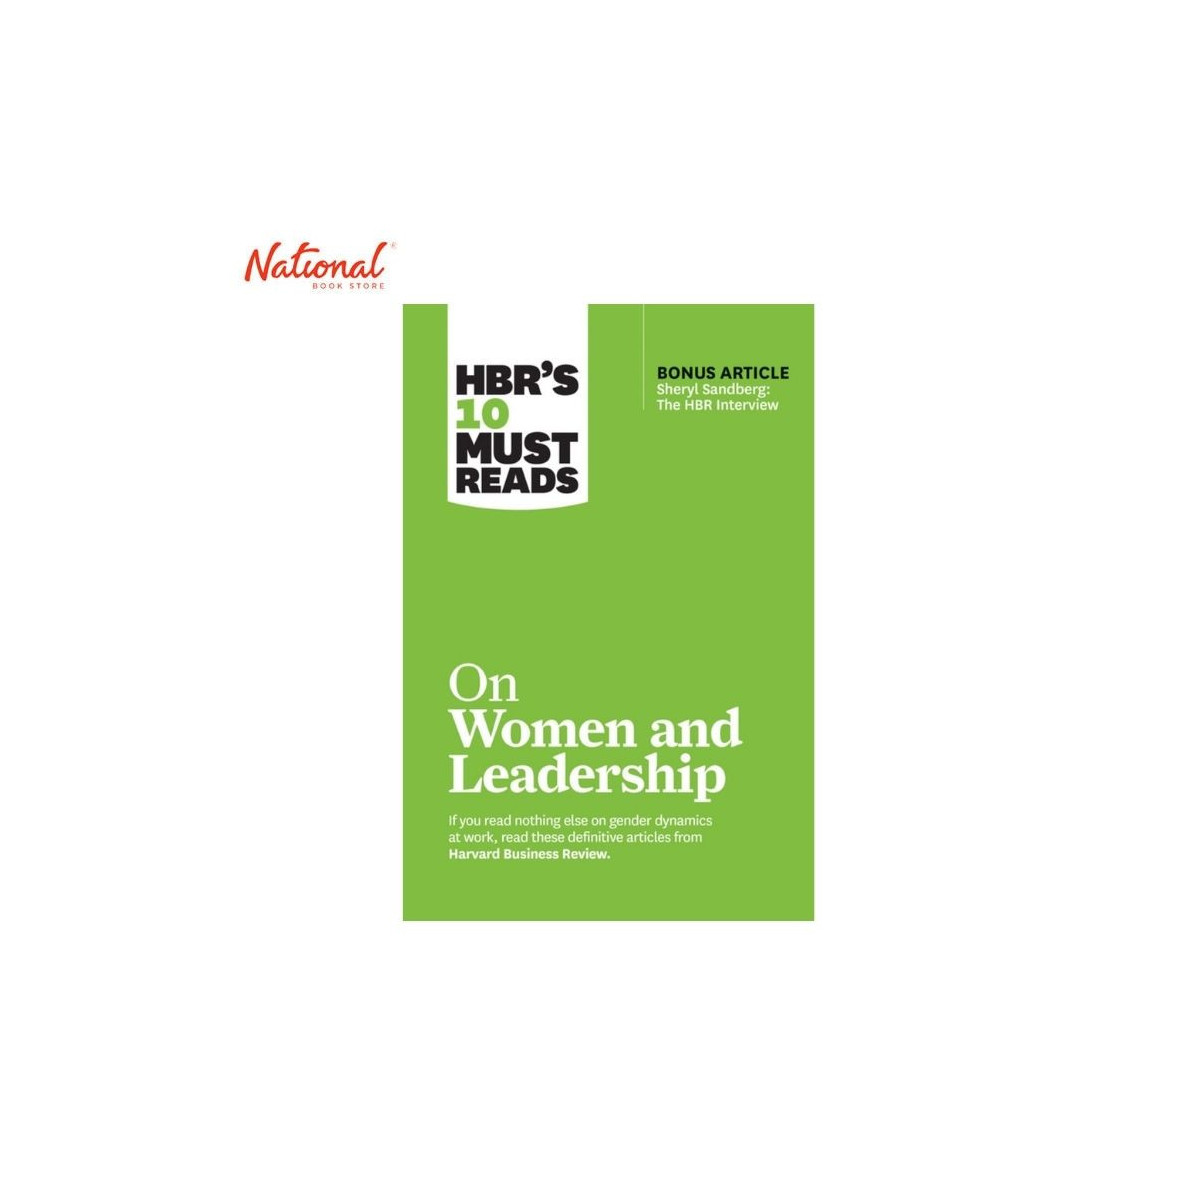 HBR's 10 Must Reads: On Women and Leadership Trade Paperback by Harvard Business Review